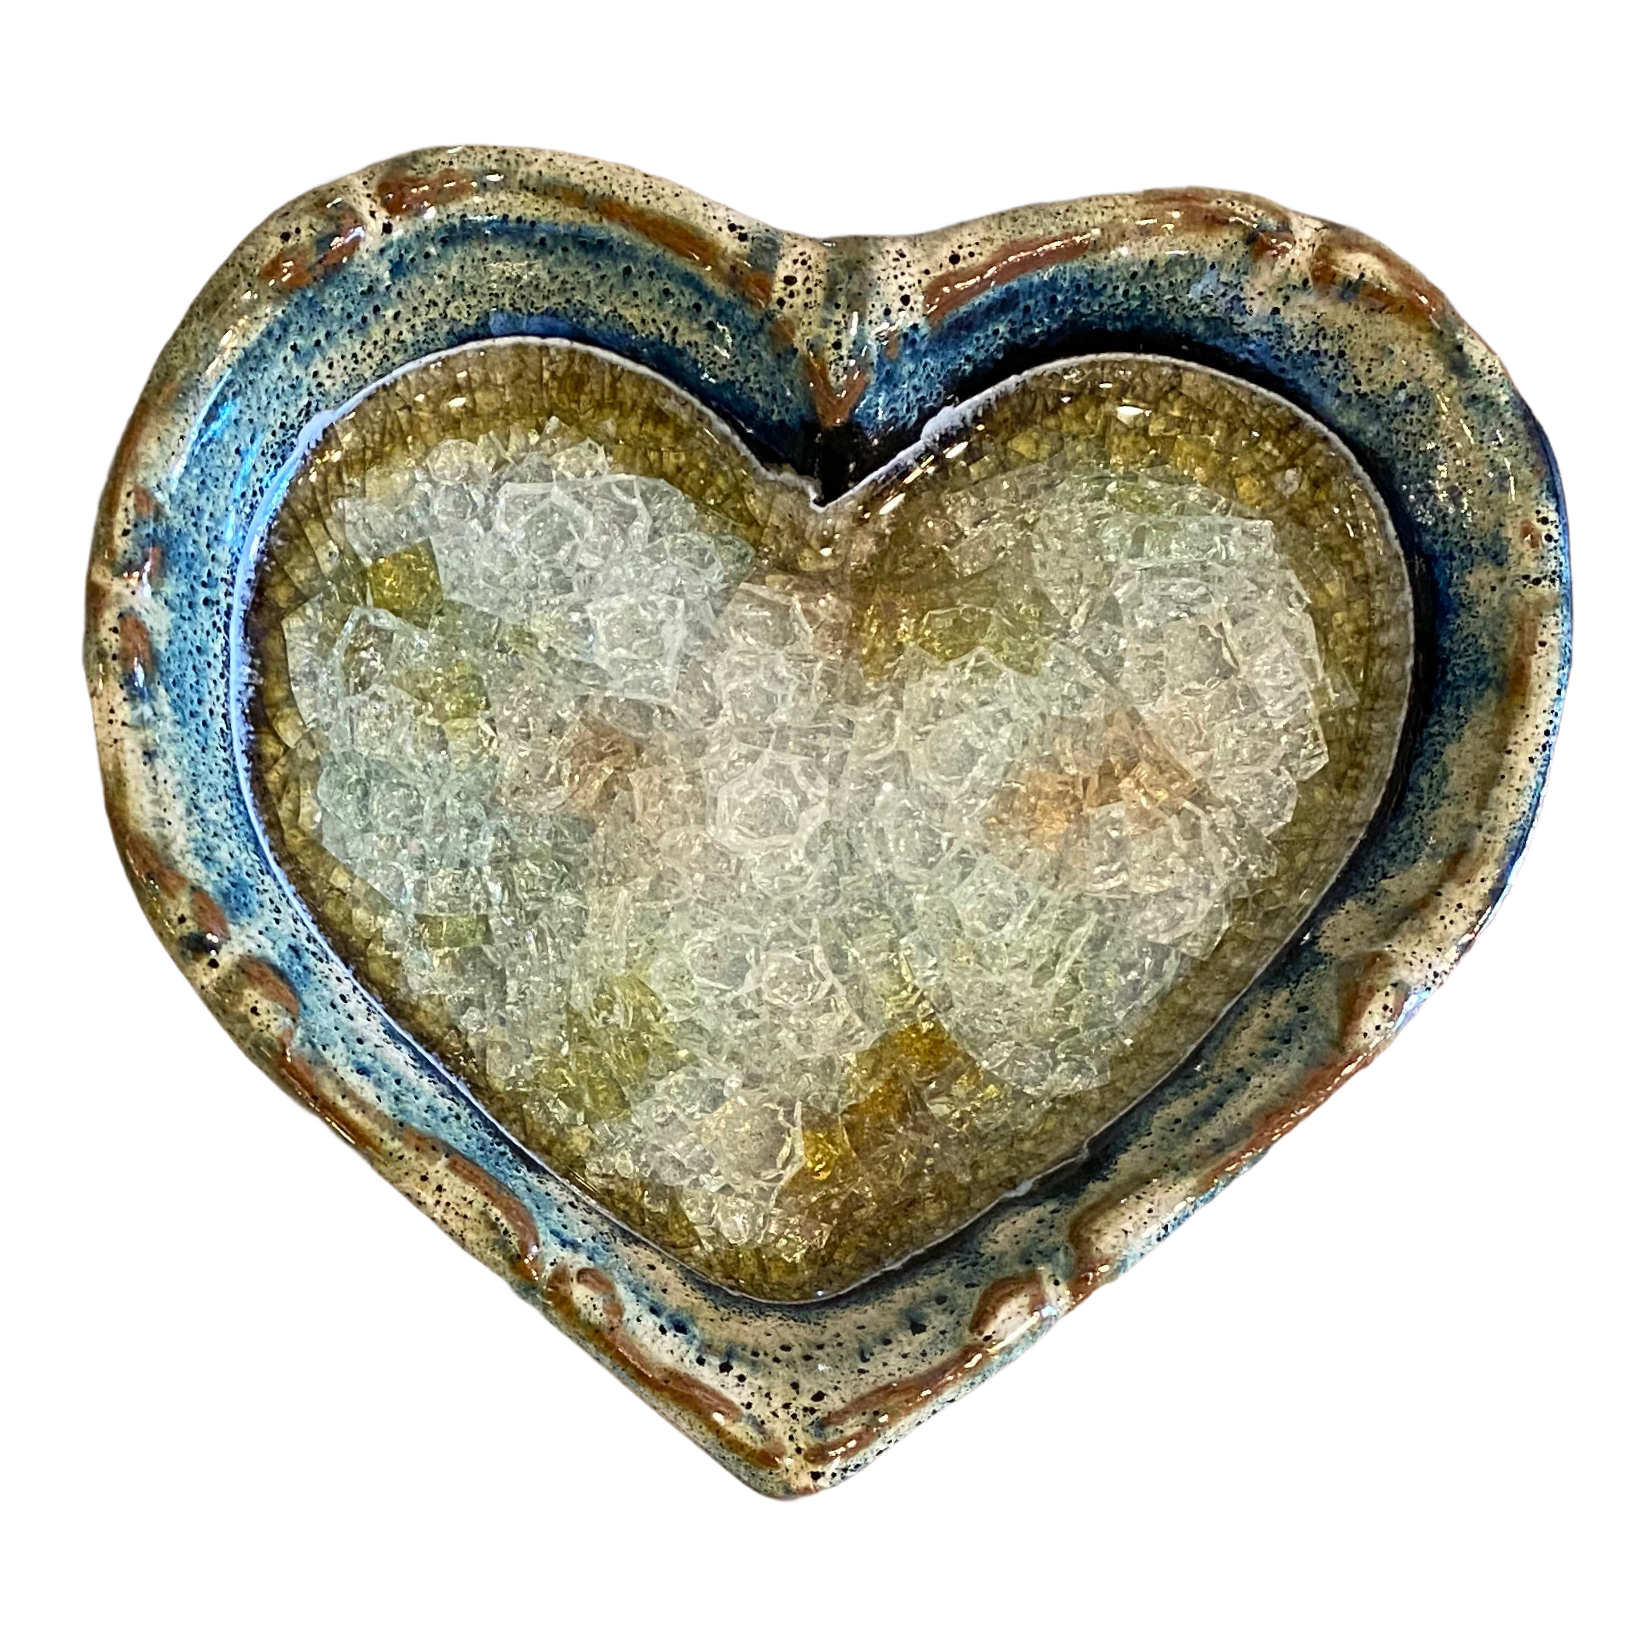 Down To Earth Pottery - Artisan Hand Made Glazed Pottery - Large Heart Dish - Mellow Monkey